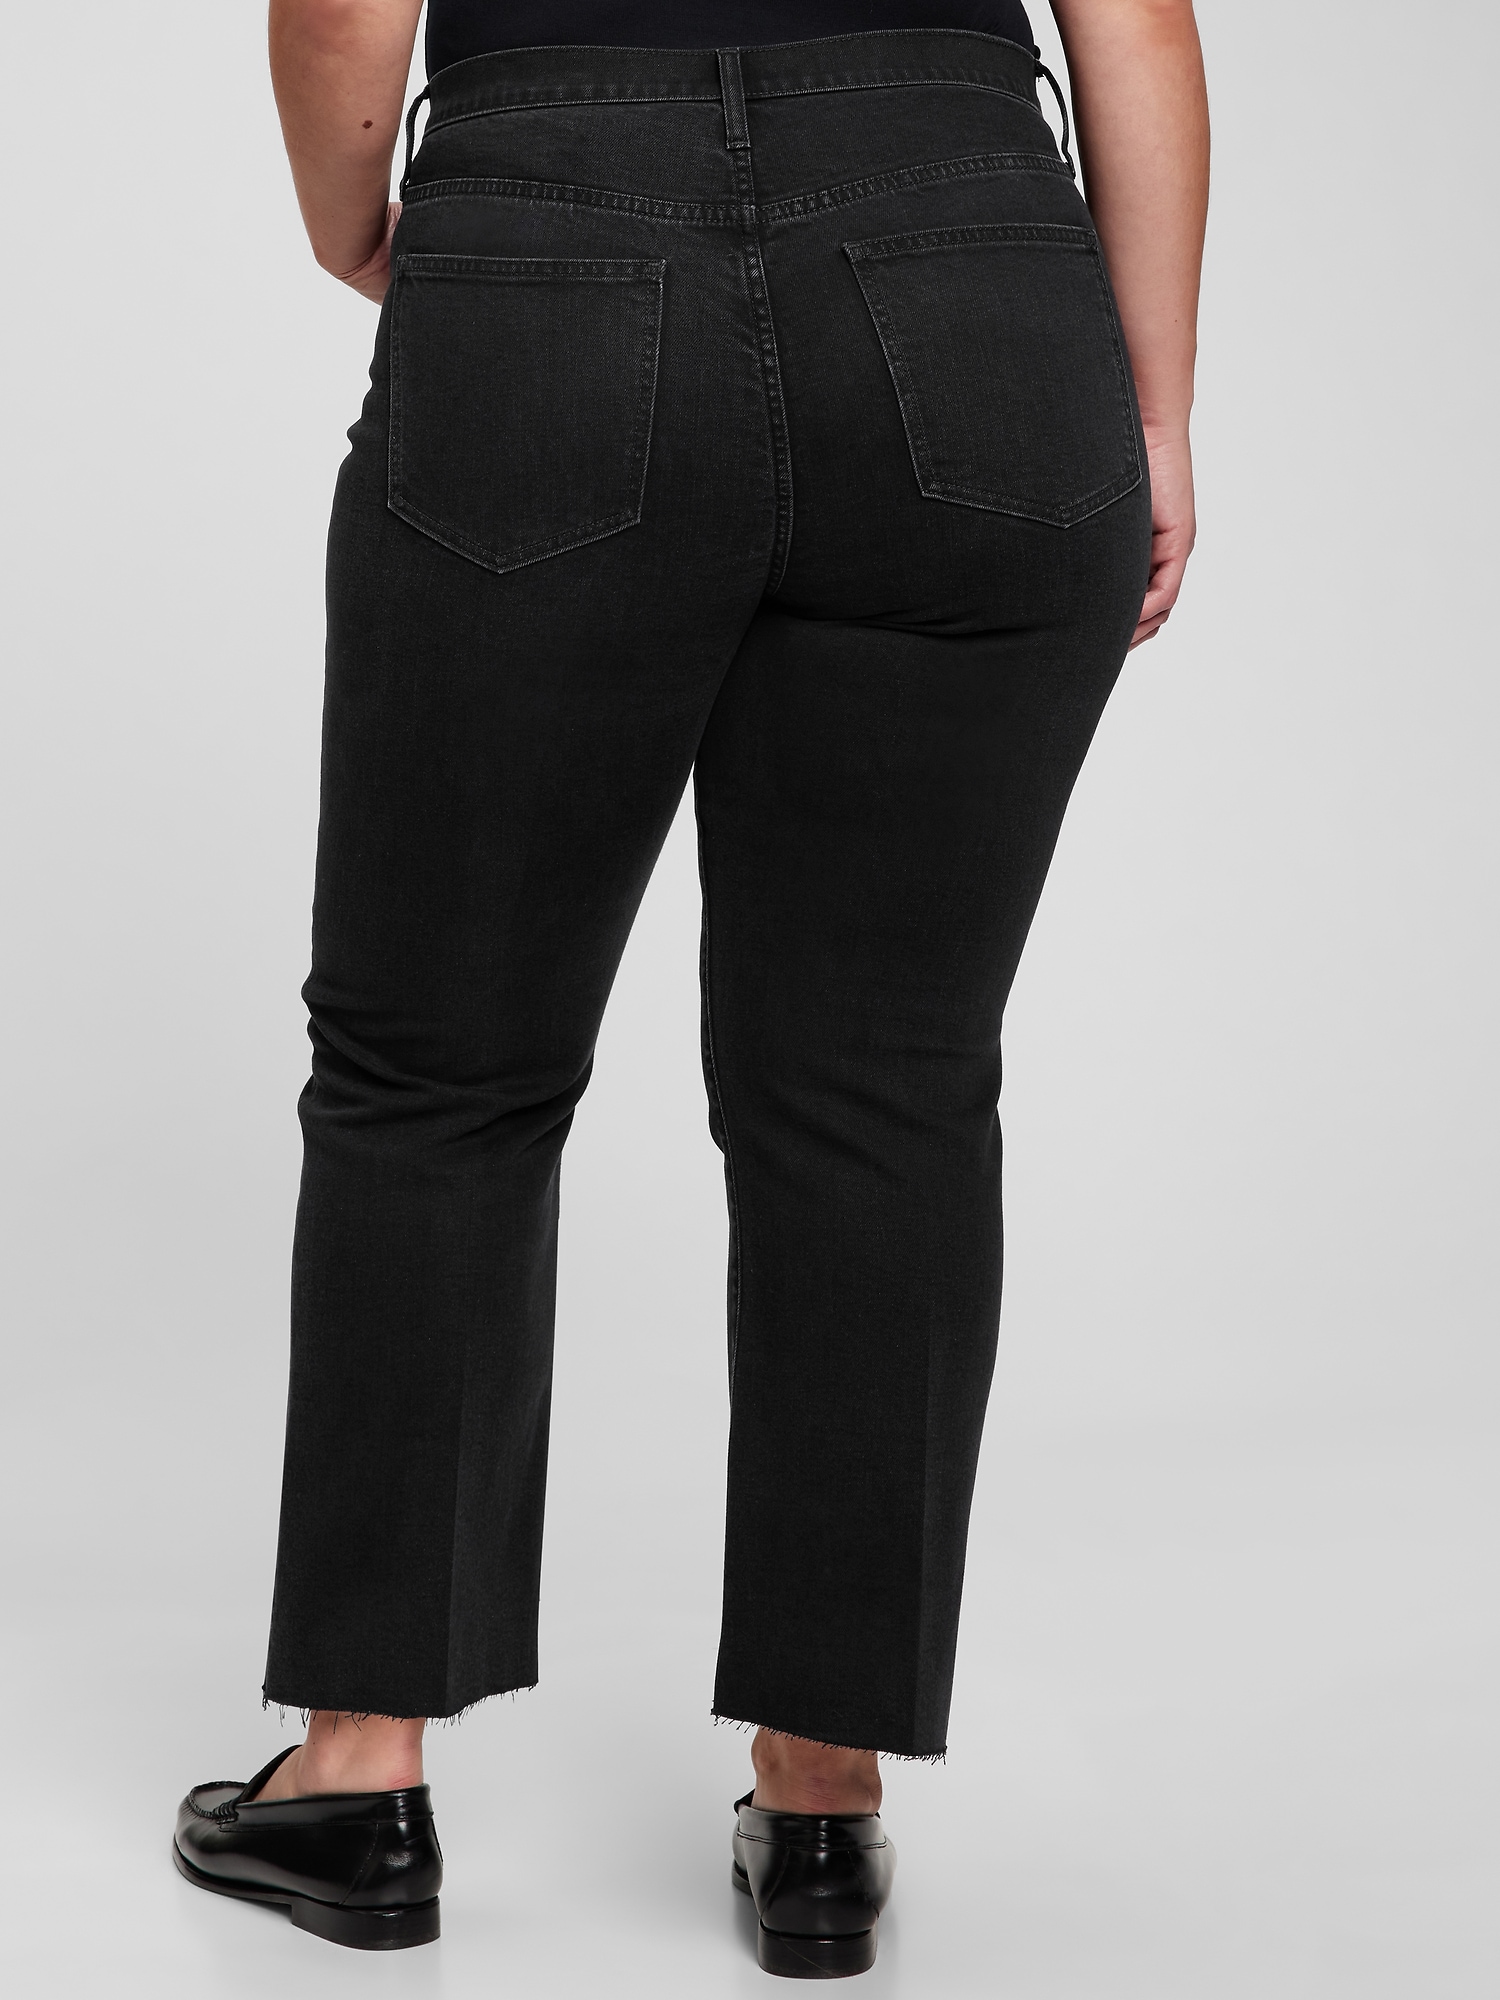 High Rise Kick Fit Jeans with Washwell | Gap